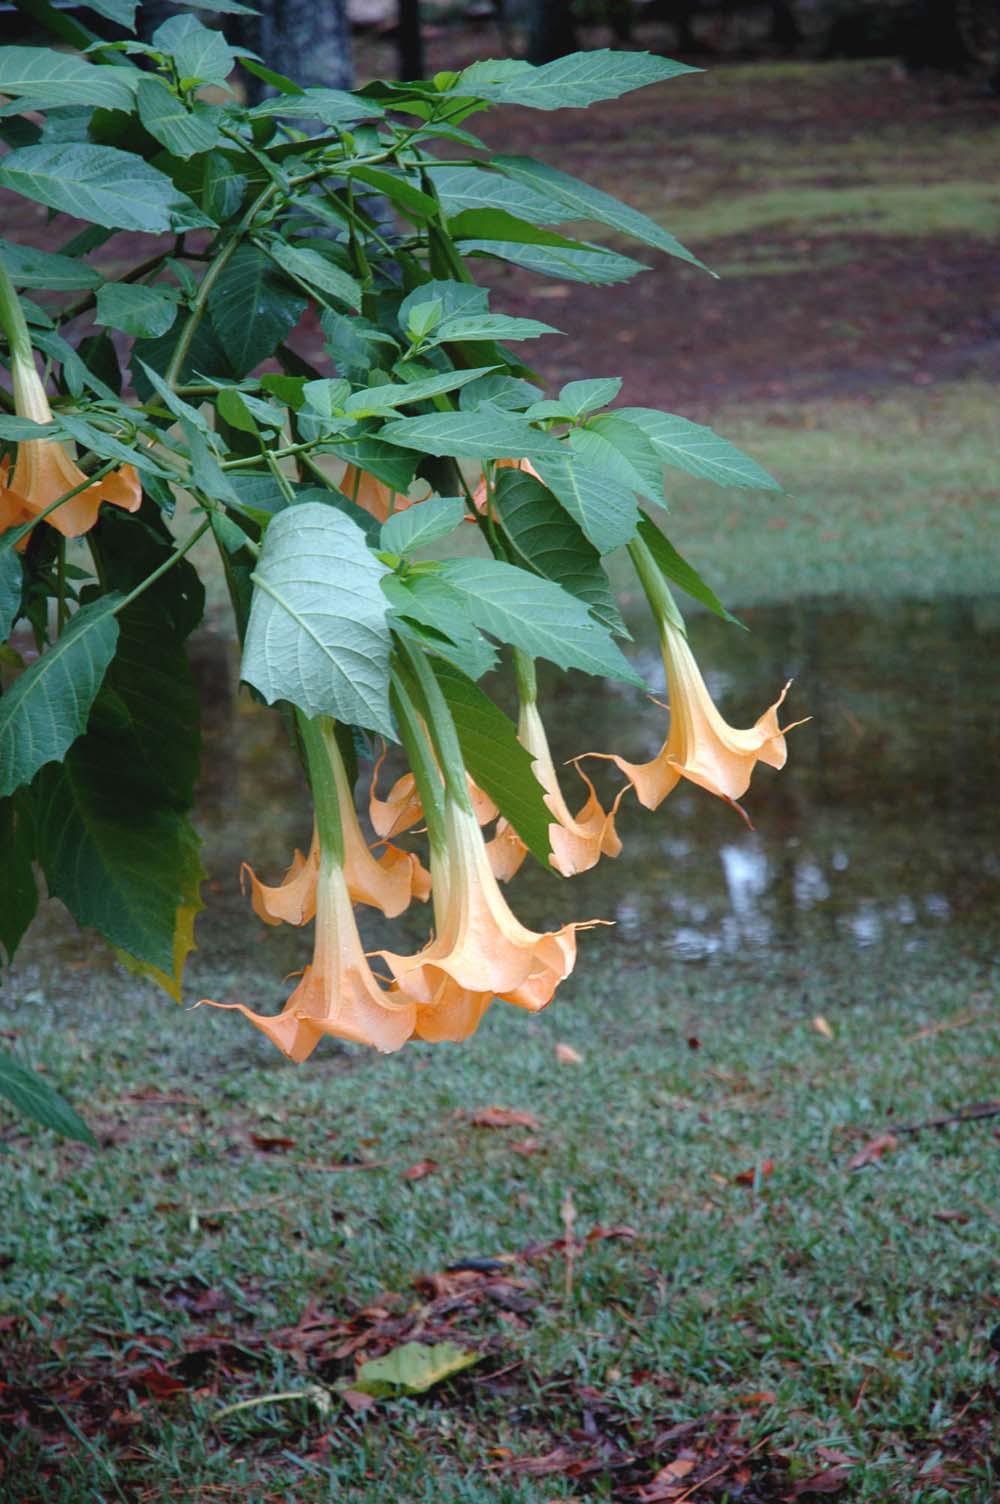 Angel's trumpets come in both yellow gold and rich pink and give an exotic and tropical look to gardens. They perform well in Mississippi gardens, and really strut their stuff in late summer and fall. (Photo by Norman Winter/ Mississippi State University horticulturist)